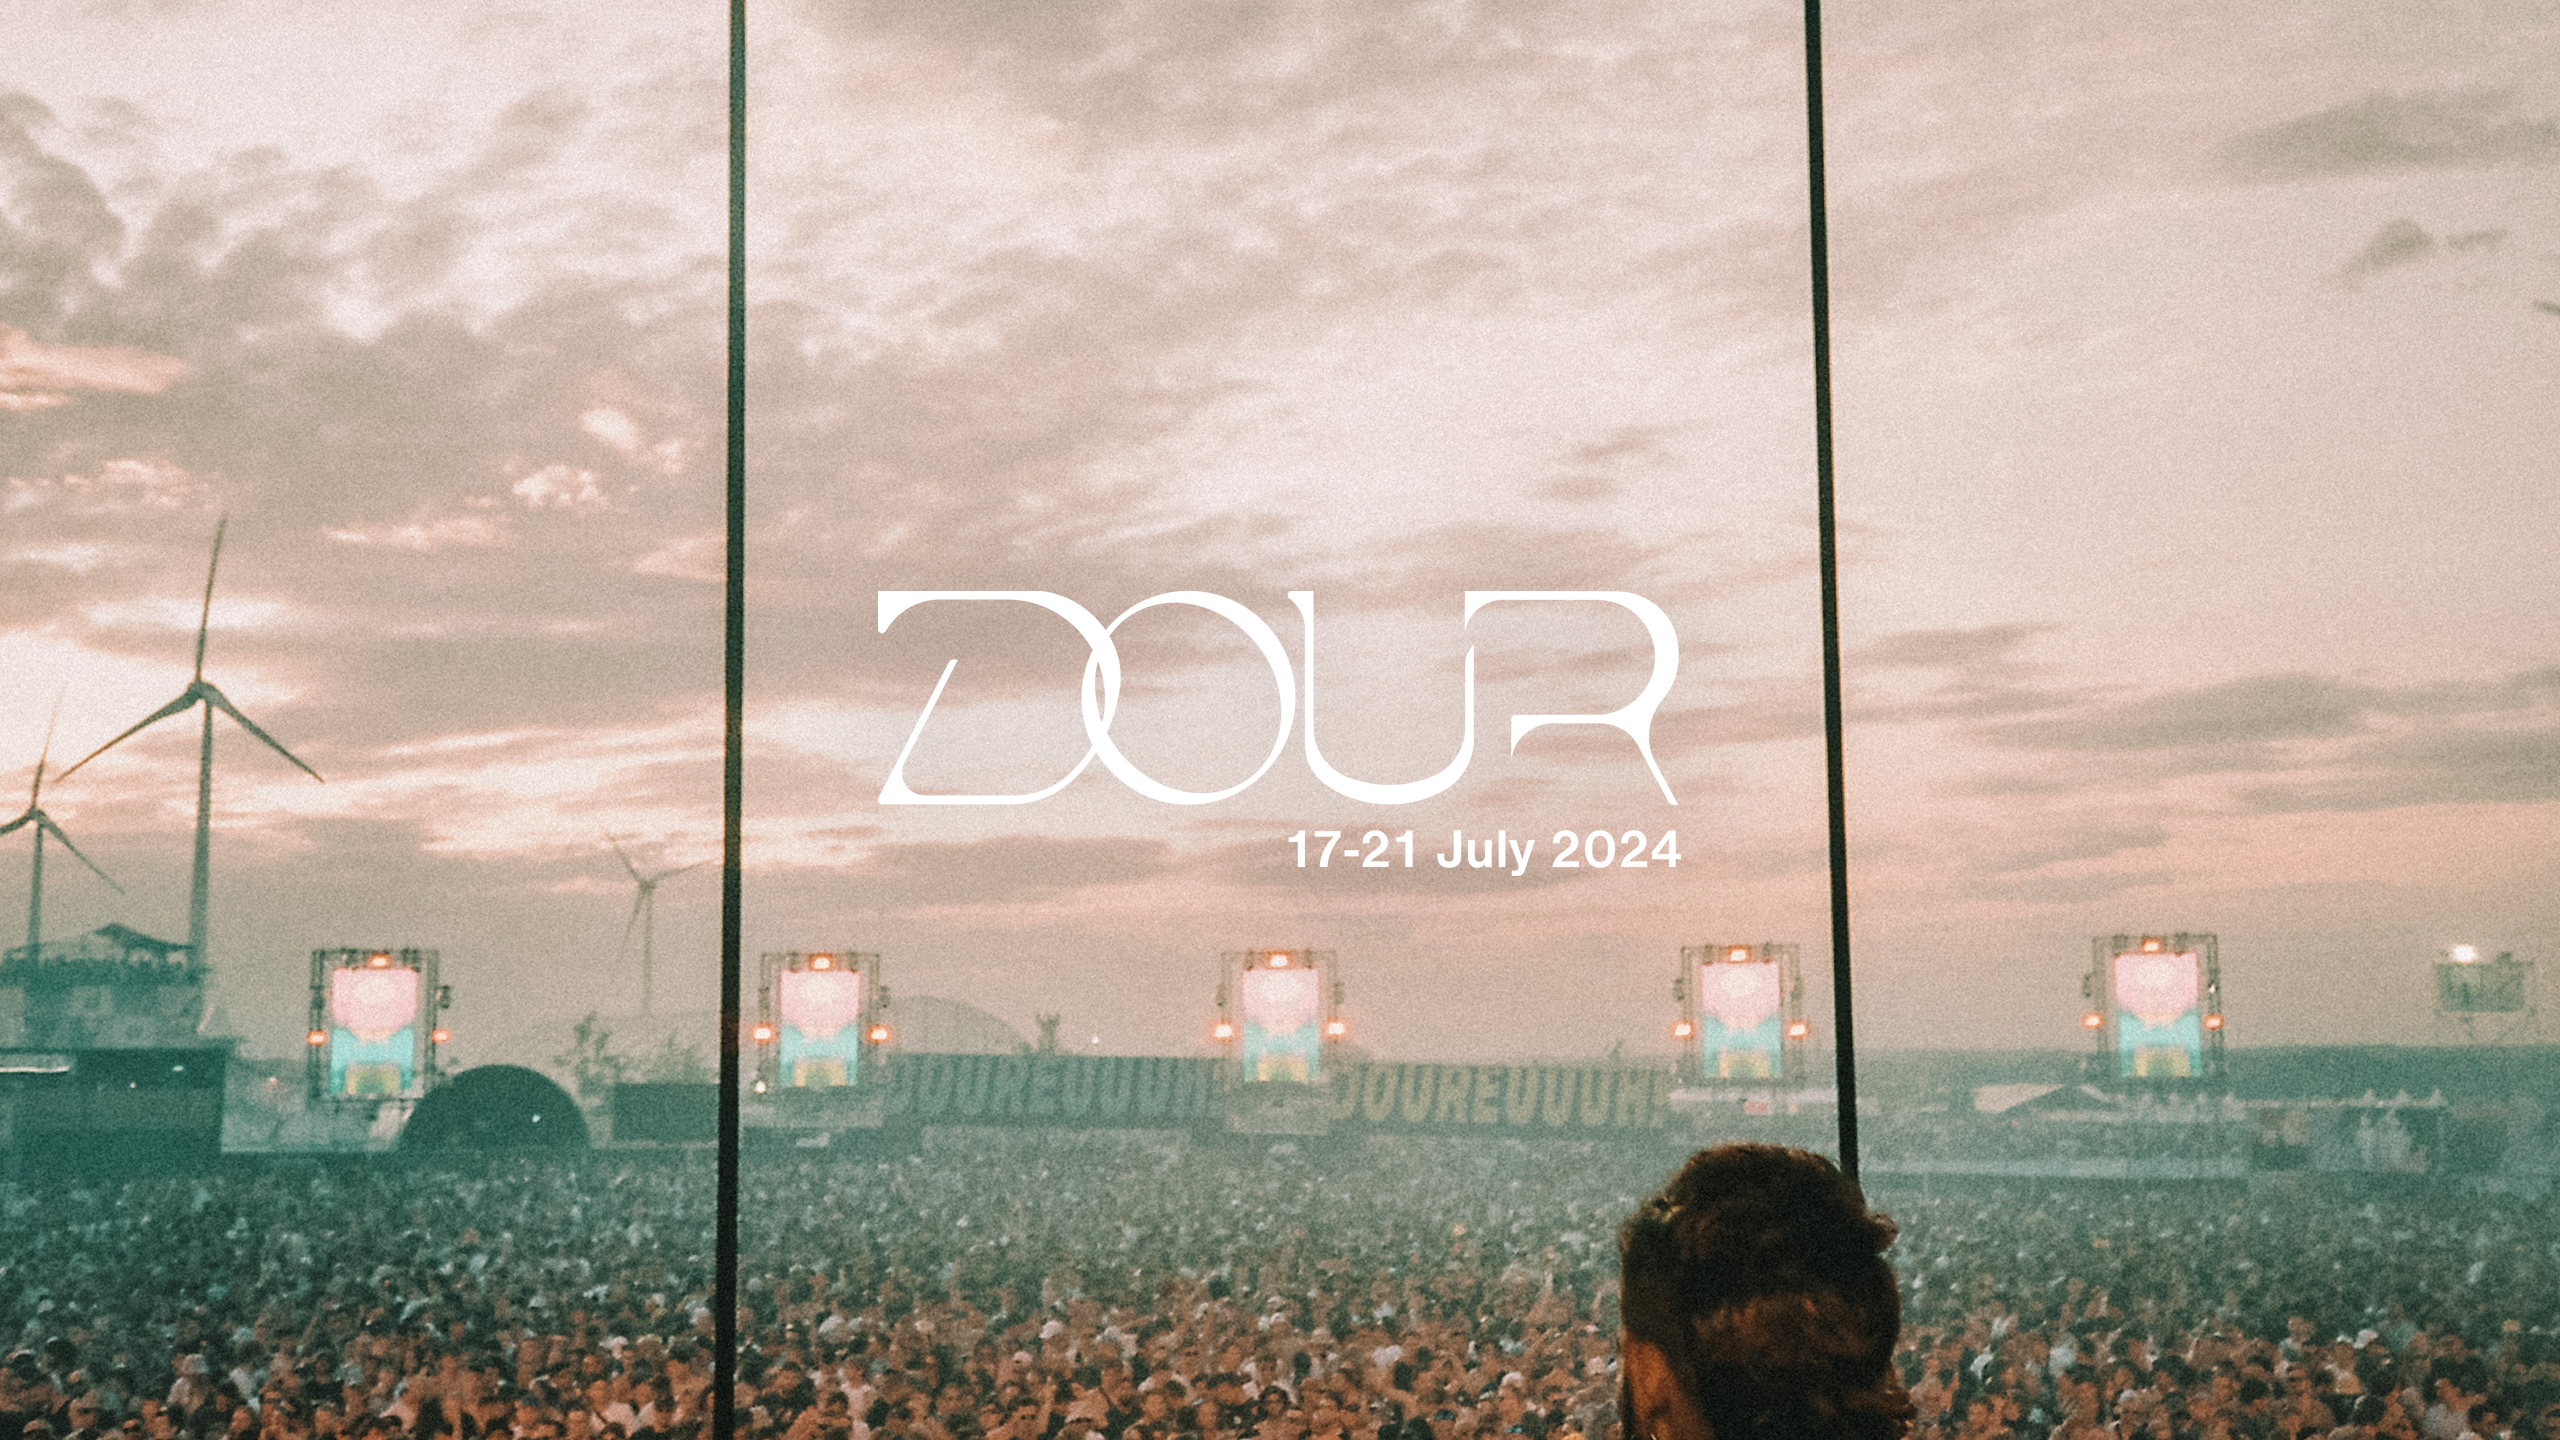 Dour Festival 2024 - Day 3 - フライヤー表